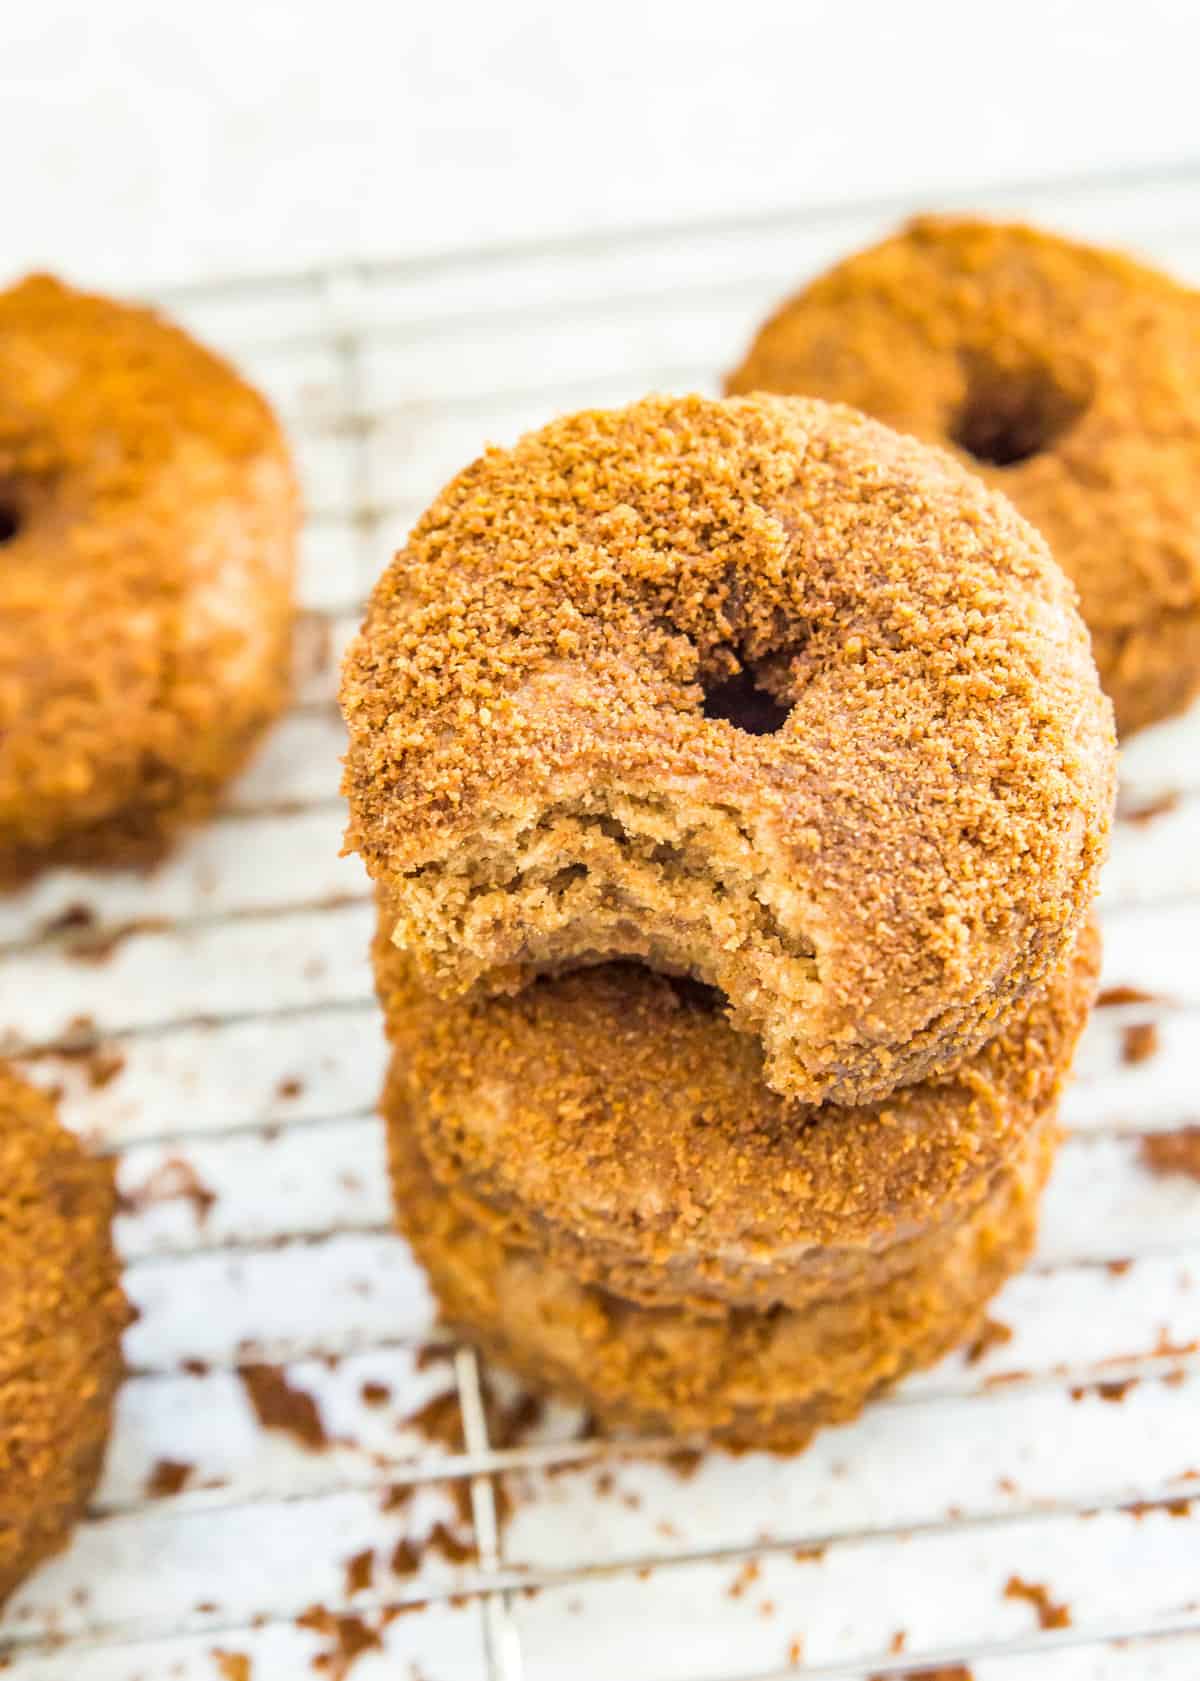 A stack of three vegan donuts coated in cinnamon and sugar and the top donut has a bite out of it.